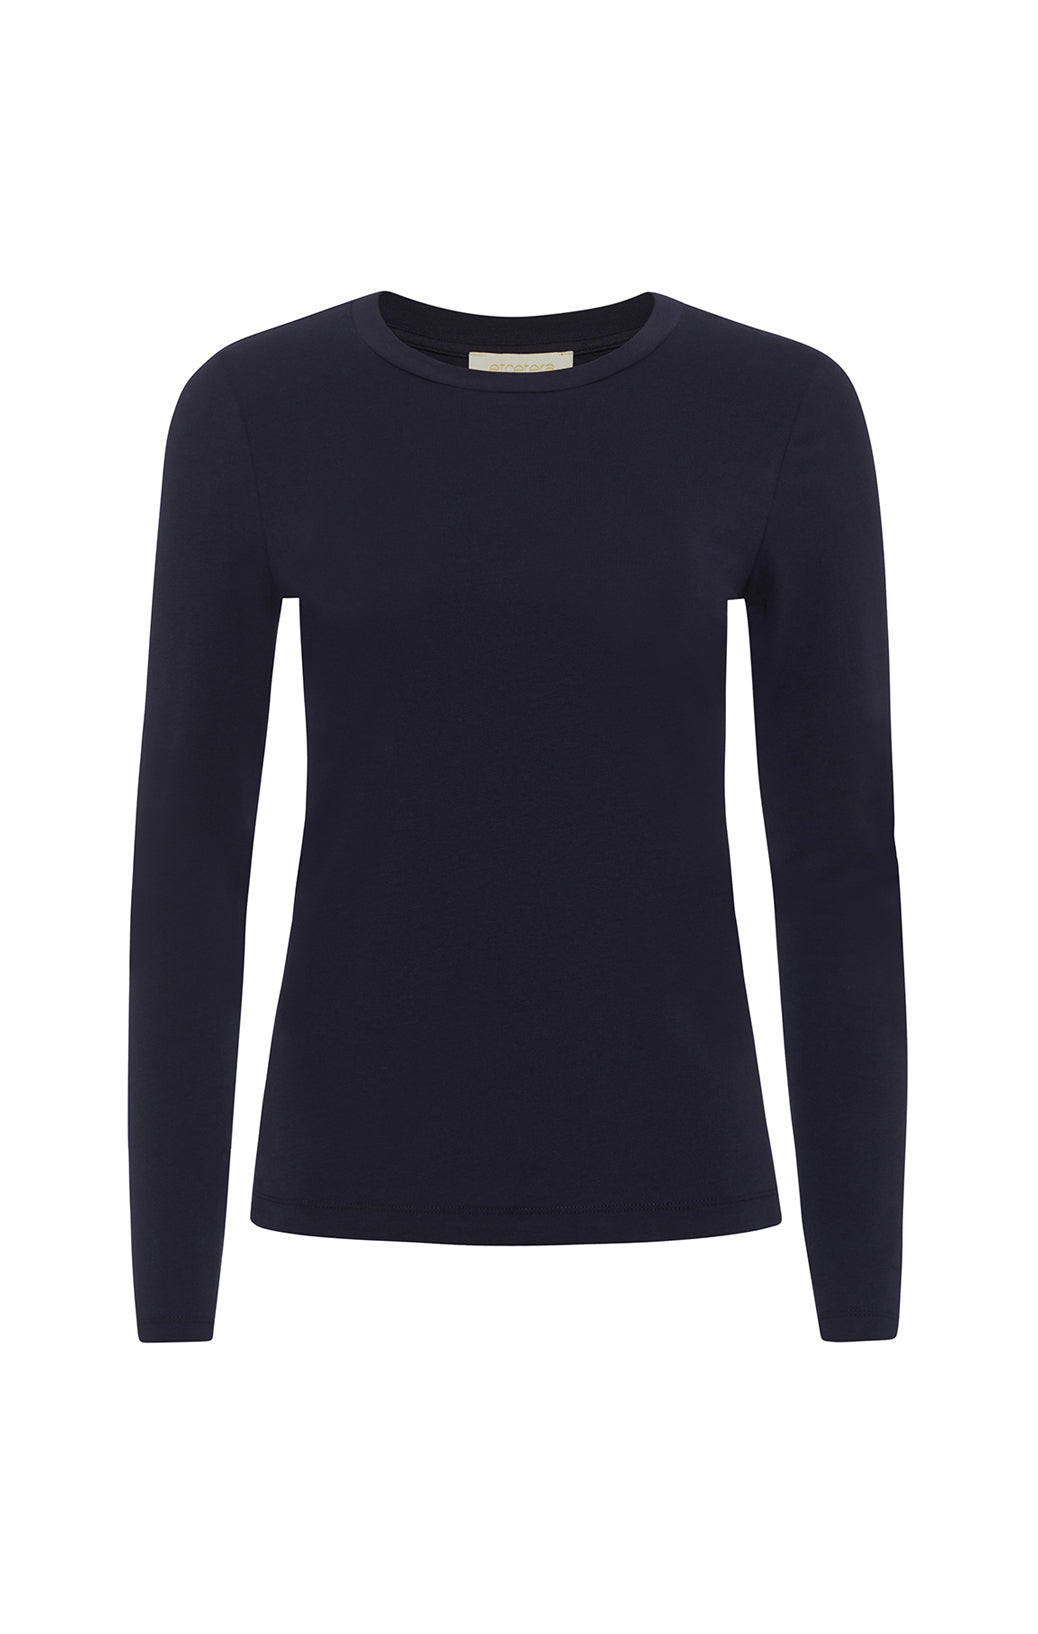 Clever-Blk - Long-Sleeve Jersey Top